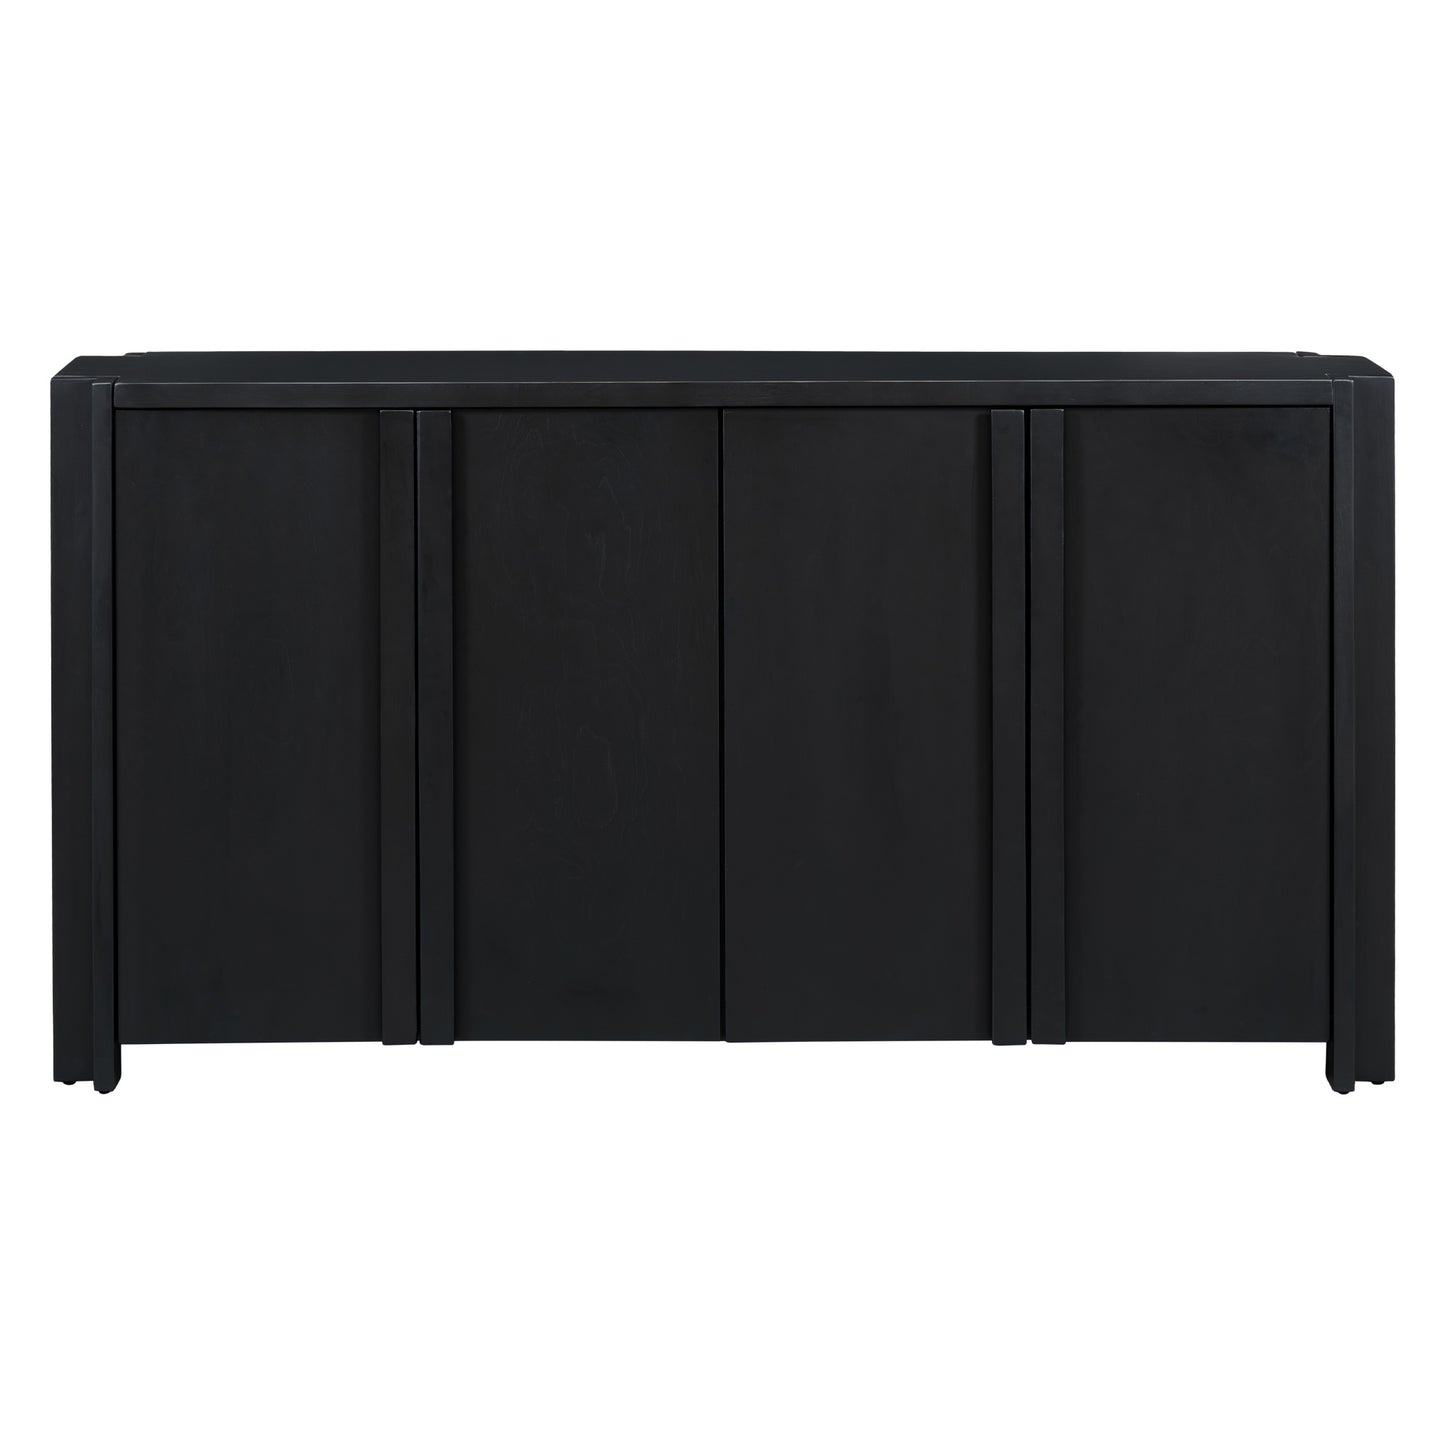 U_Style Designed Storage Cabinet Sideboard with 4 Doors , Adjustable Shelves, Suitable for Living Rooms, Entrance and Study Rooms.